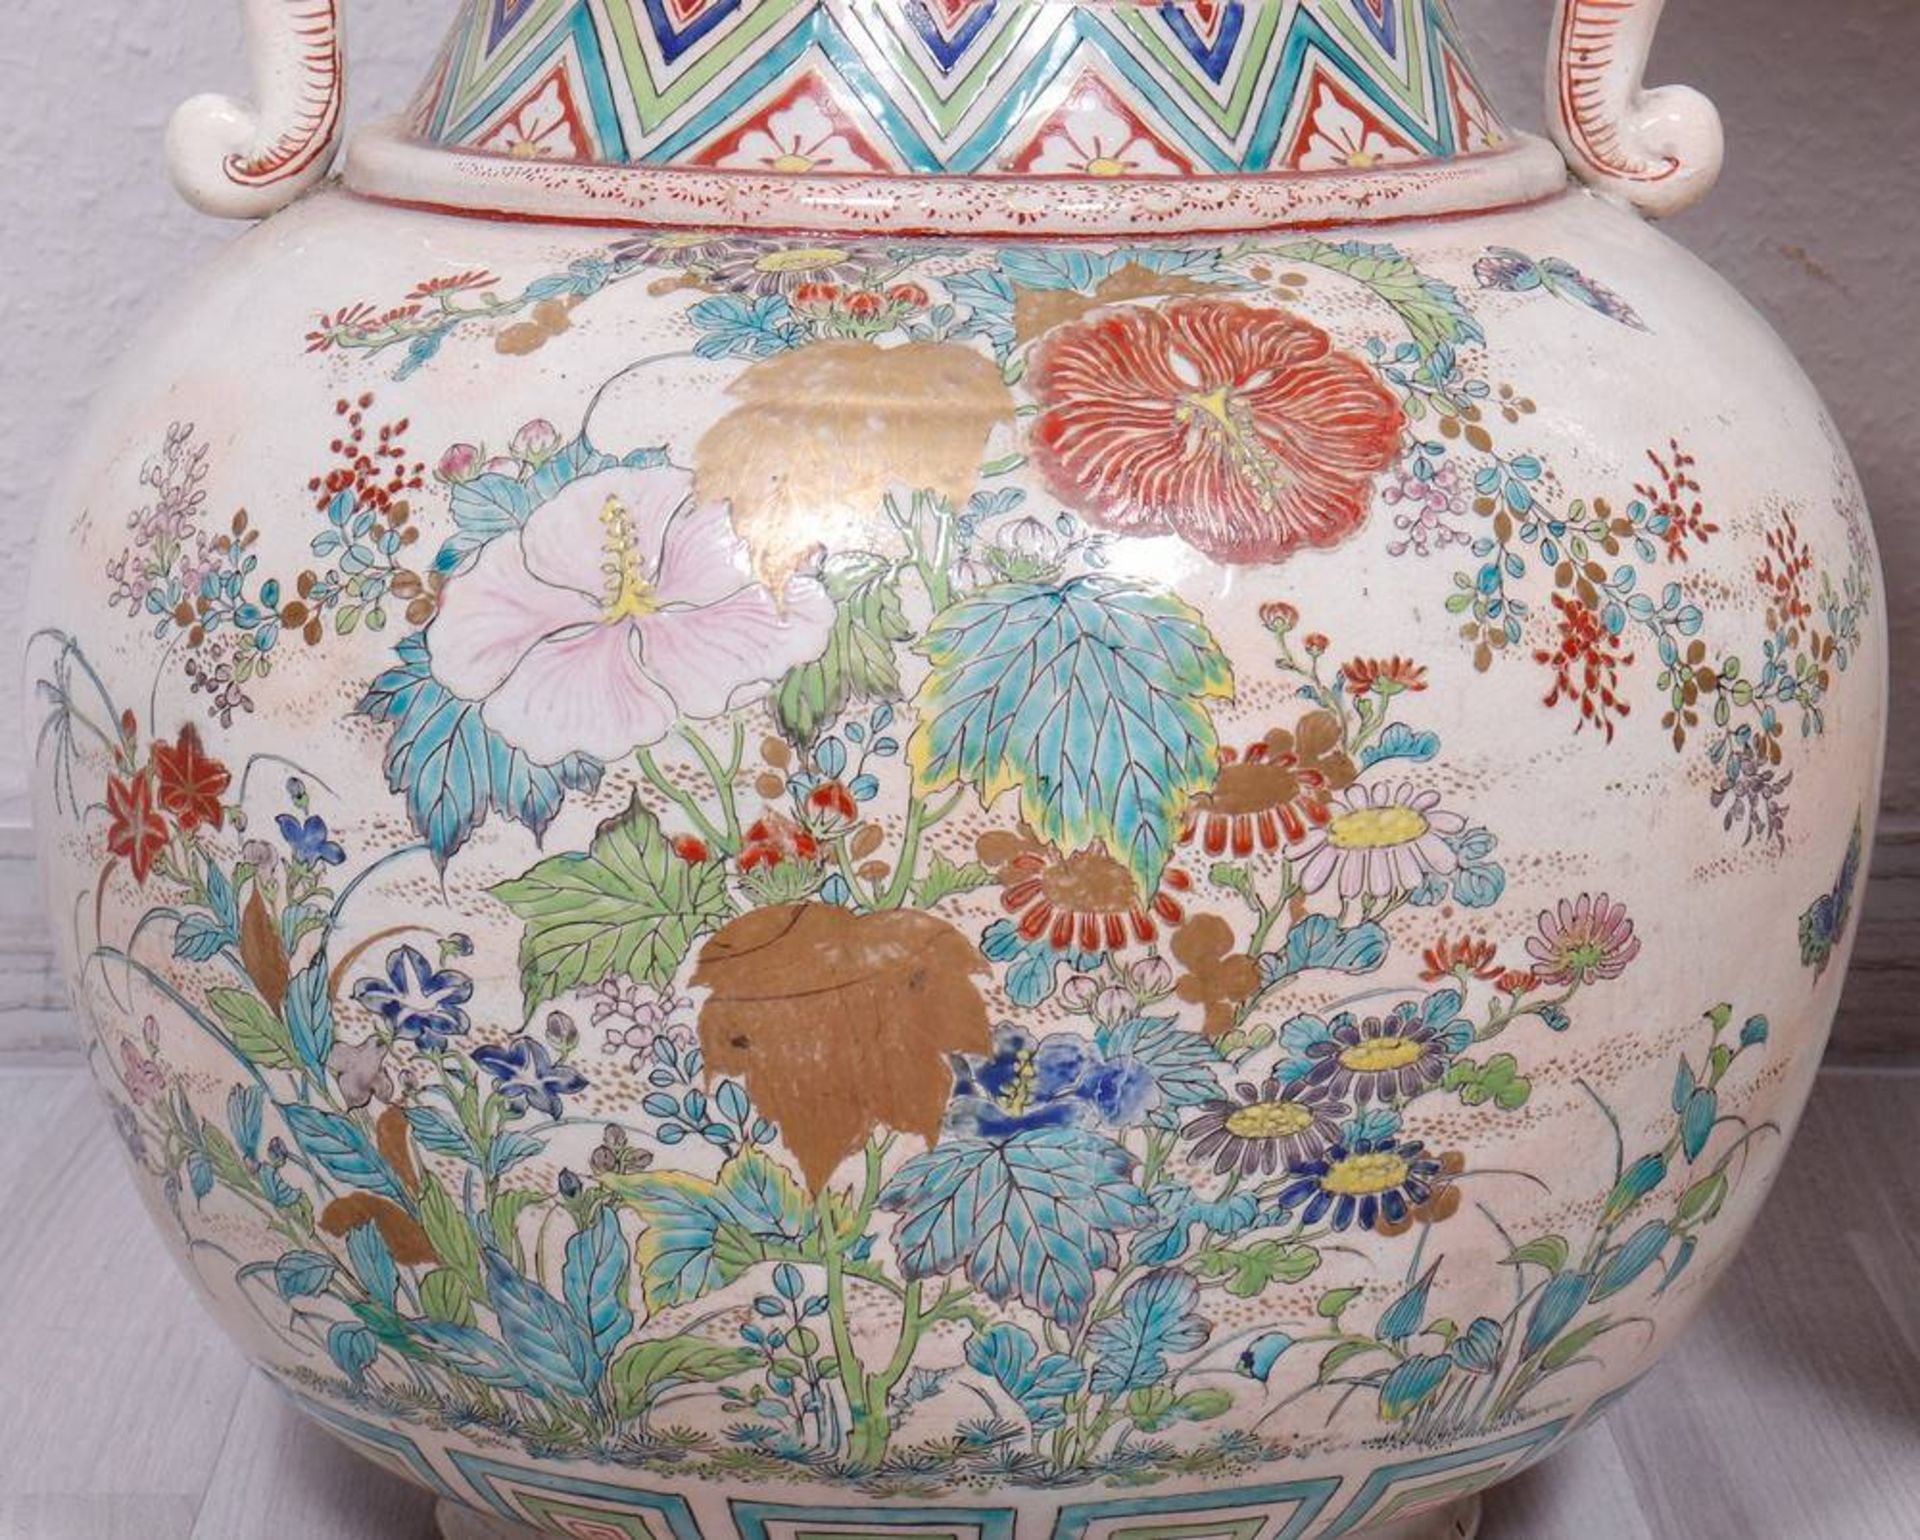 Pair of large vases, China, probably early 20th C. - Image 4 of 6